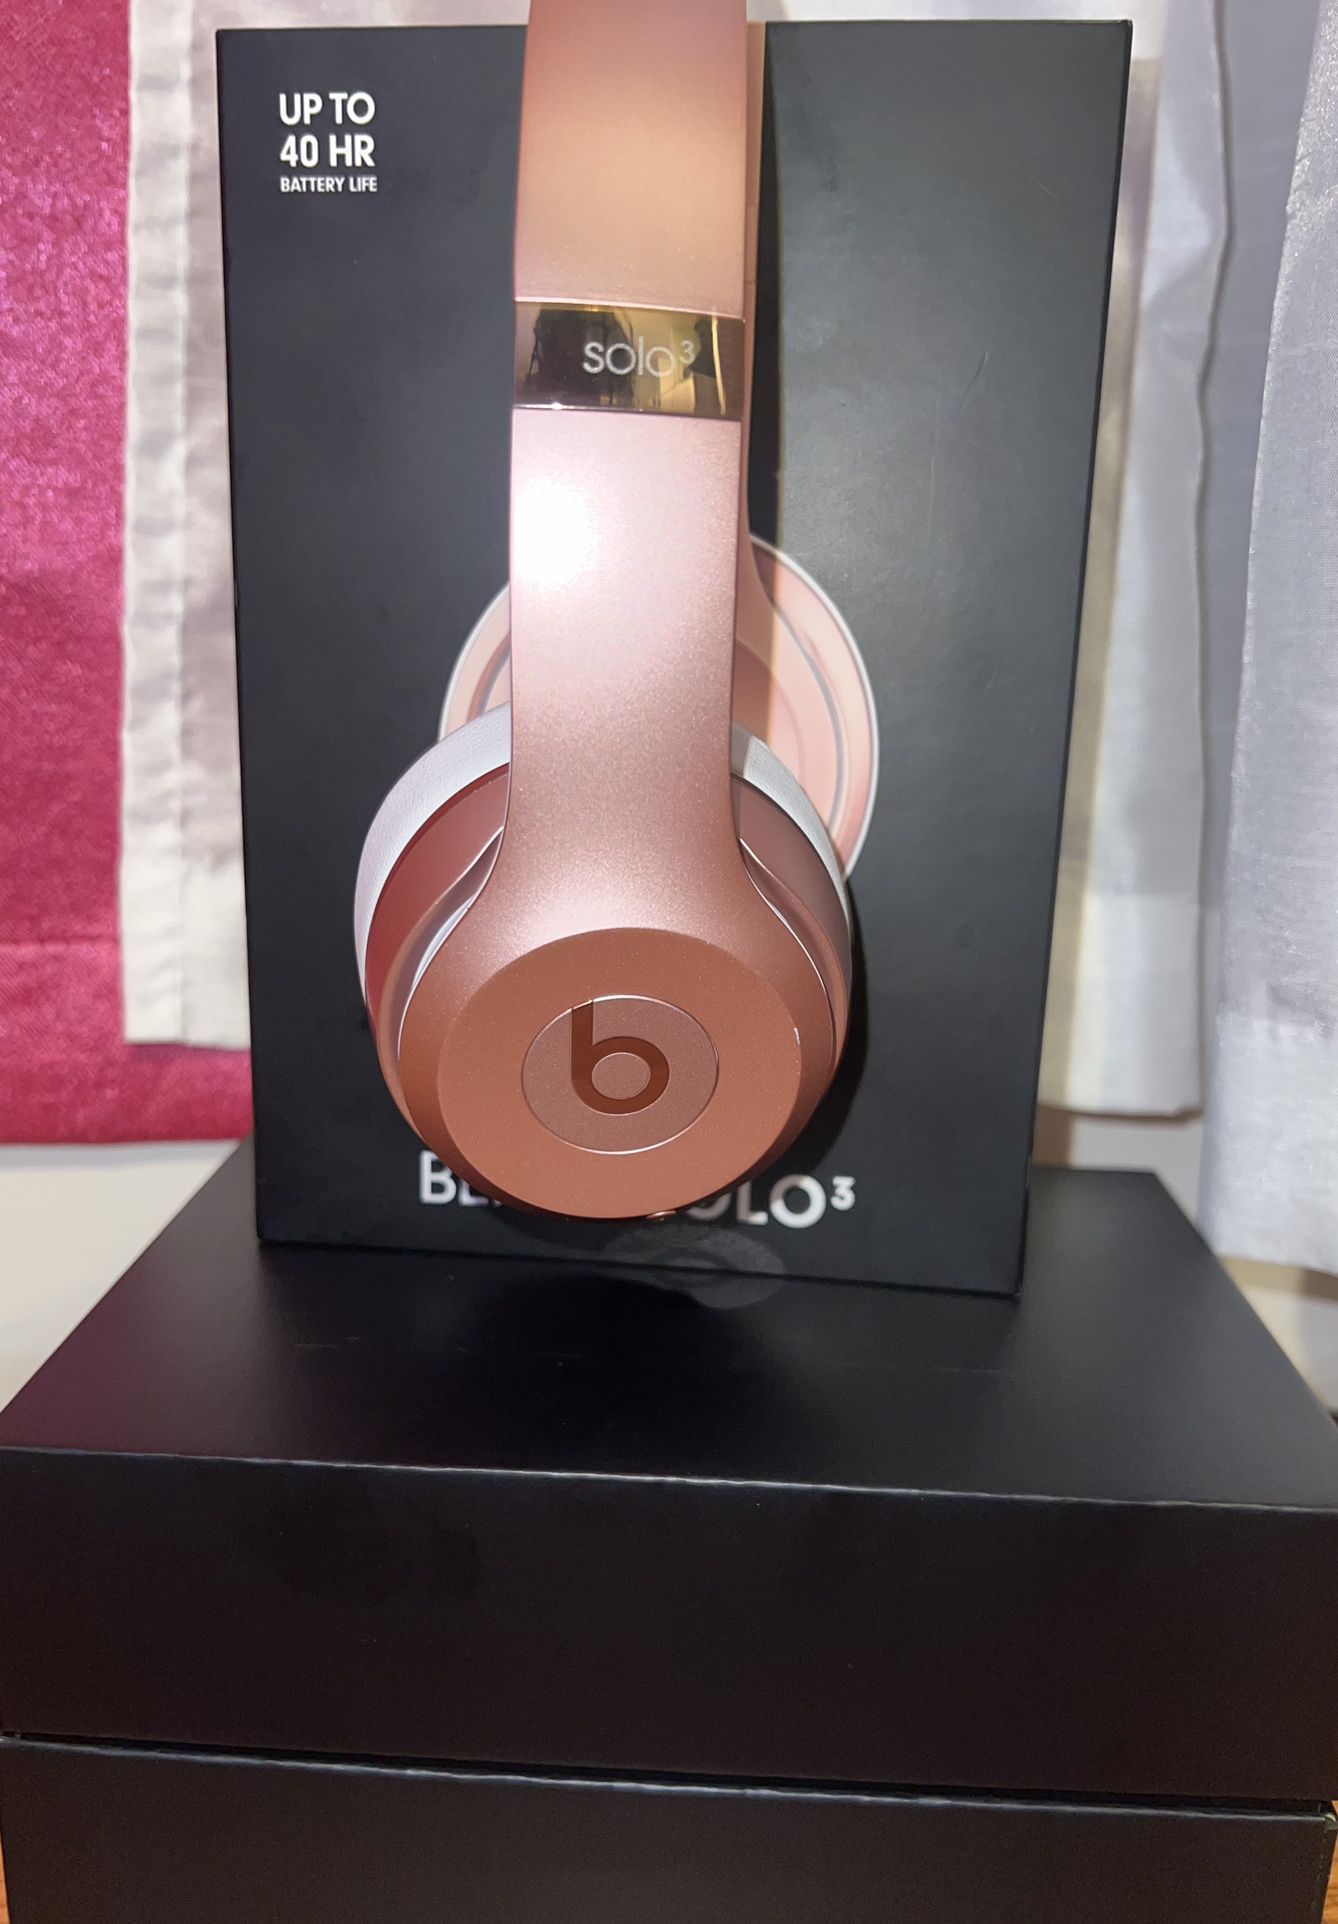 Rose Gold Solo 3 Beats